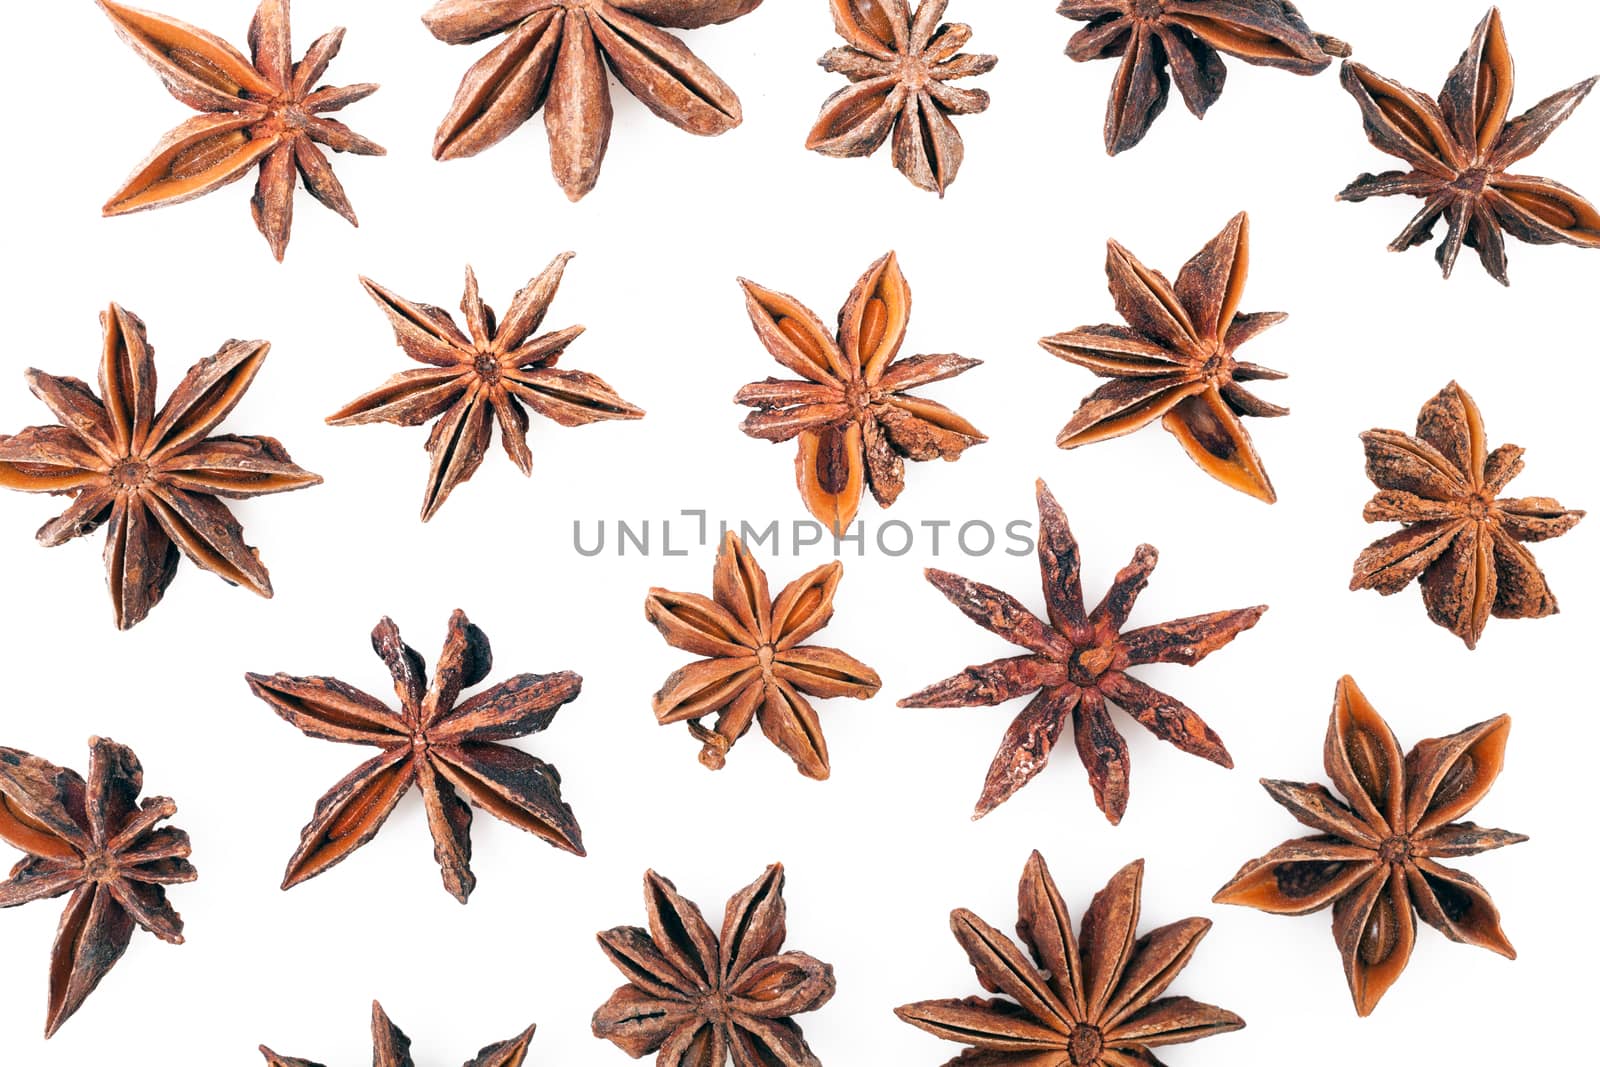 Anise stars by Portokalis